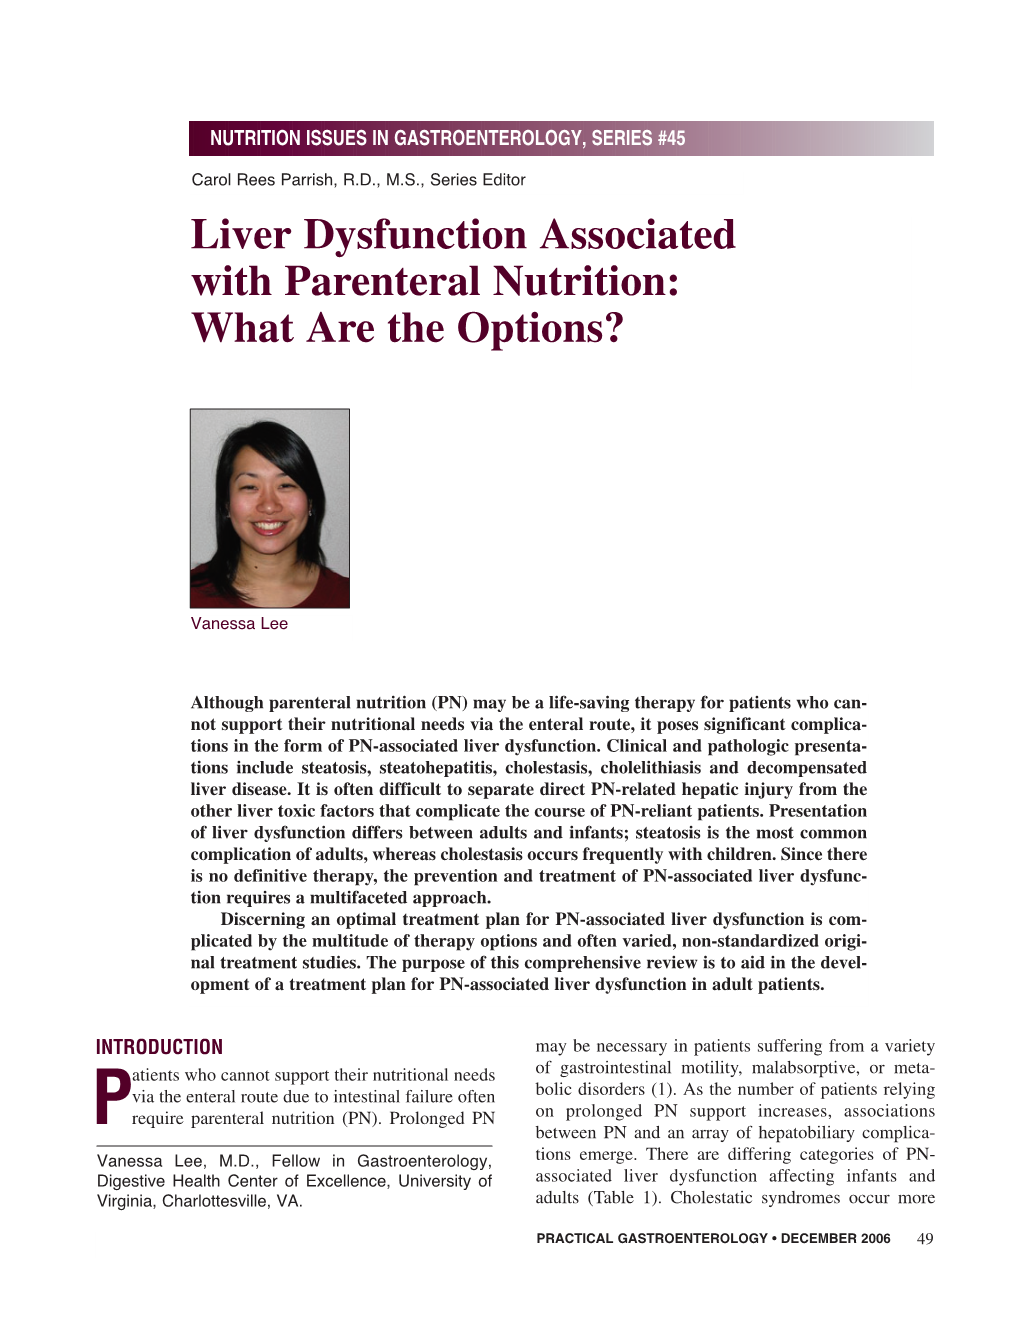 Liver Dysfunction Associated with Parenteral Nutrition: What Are the Options?